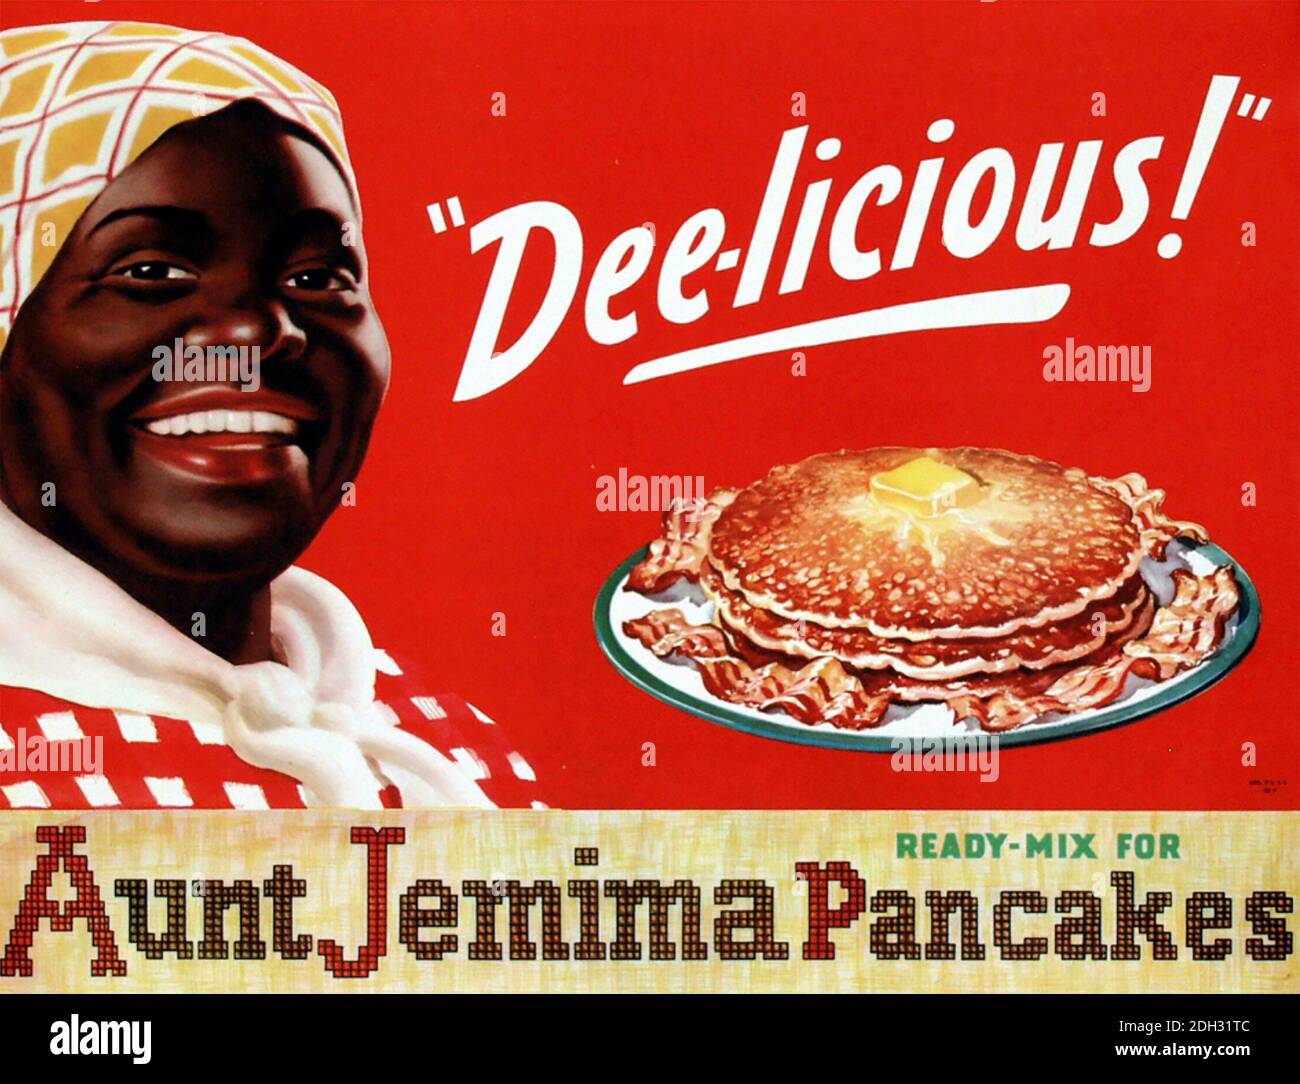 https://c8.alamy.com/comp/2DH31TC/aunt-jemima-quaker-oats-breakfast-cereal-advert-in-the-late-1940s-featuring-blues-singer-and-film-actress-edith-wilson-1896-1981-2DH31TC.jpg